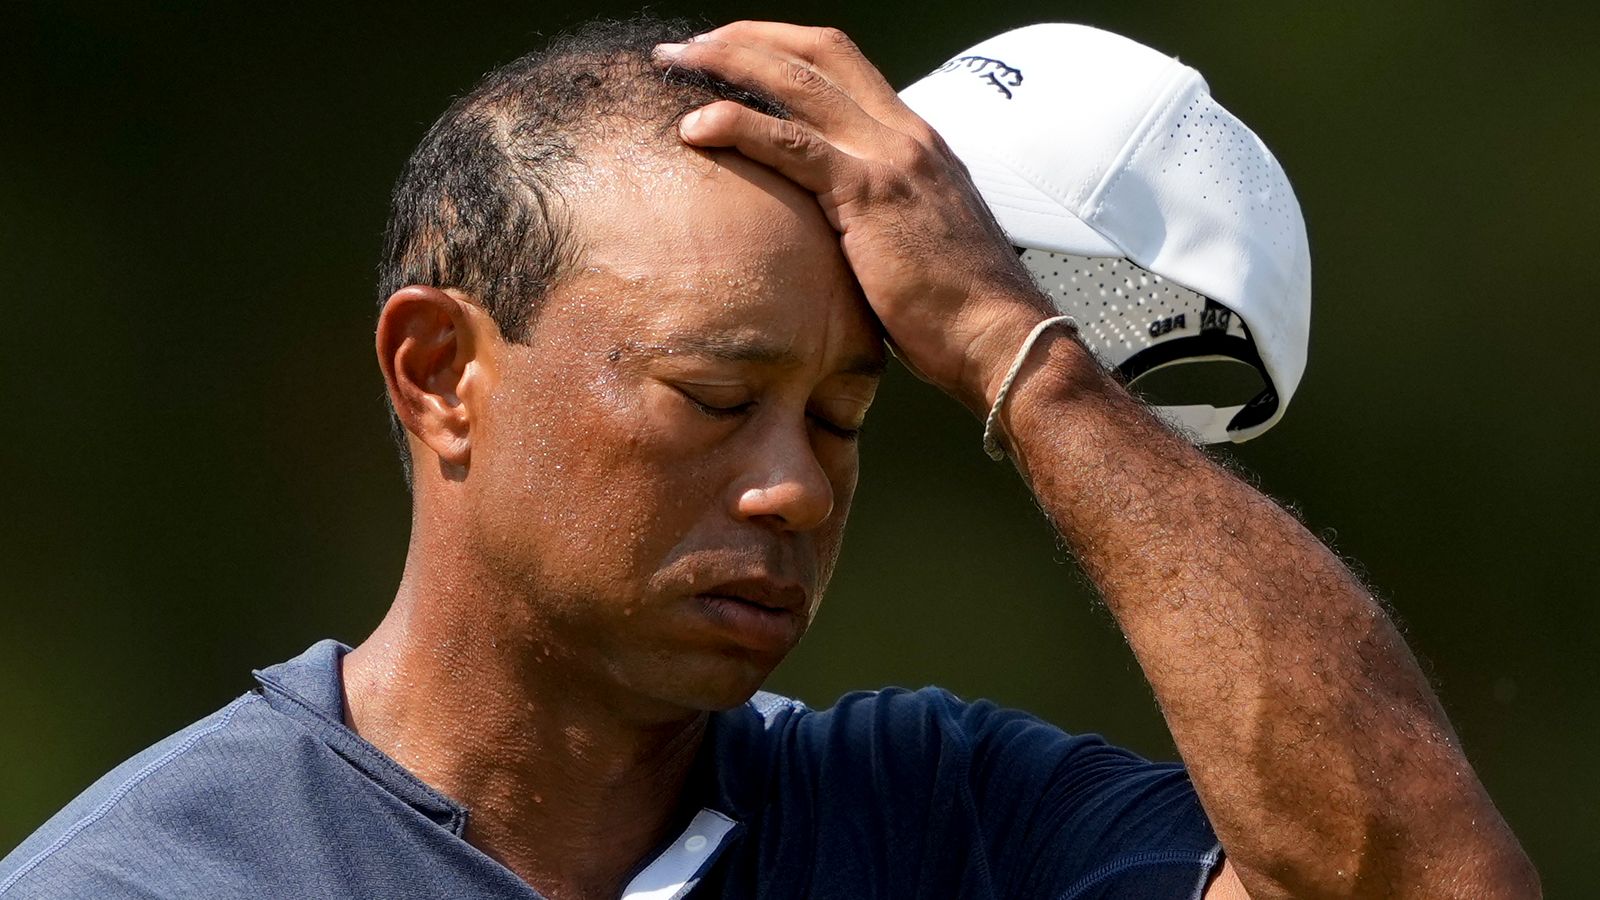 Tiger Woods Fifteentime major champion uncertain about US Open future